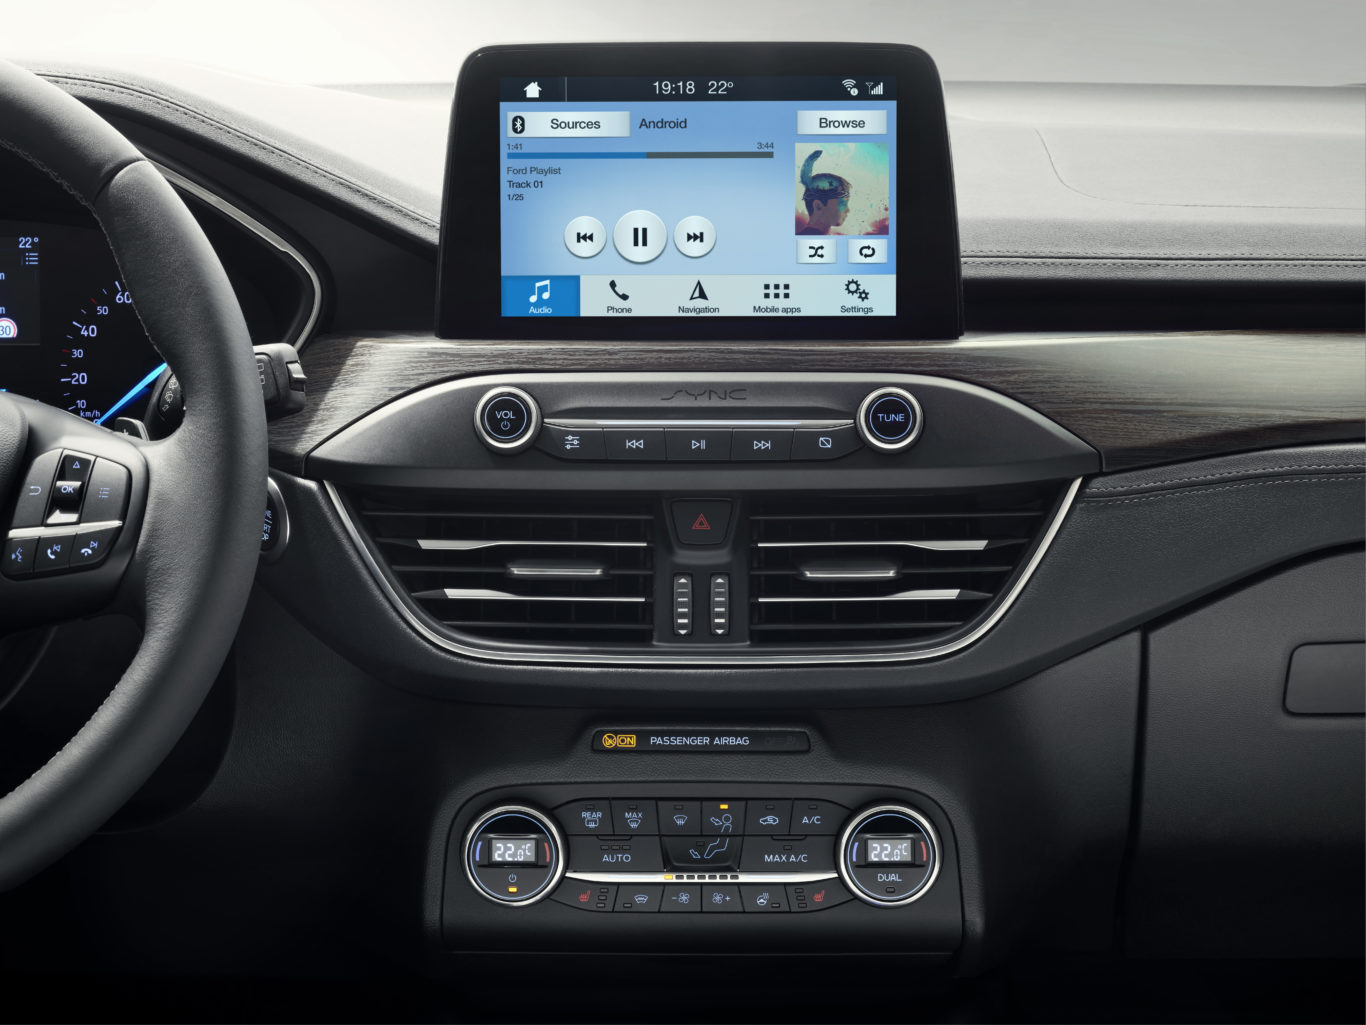 The Focus gains Ford's latest infotainment system